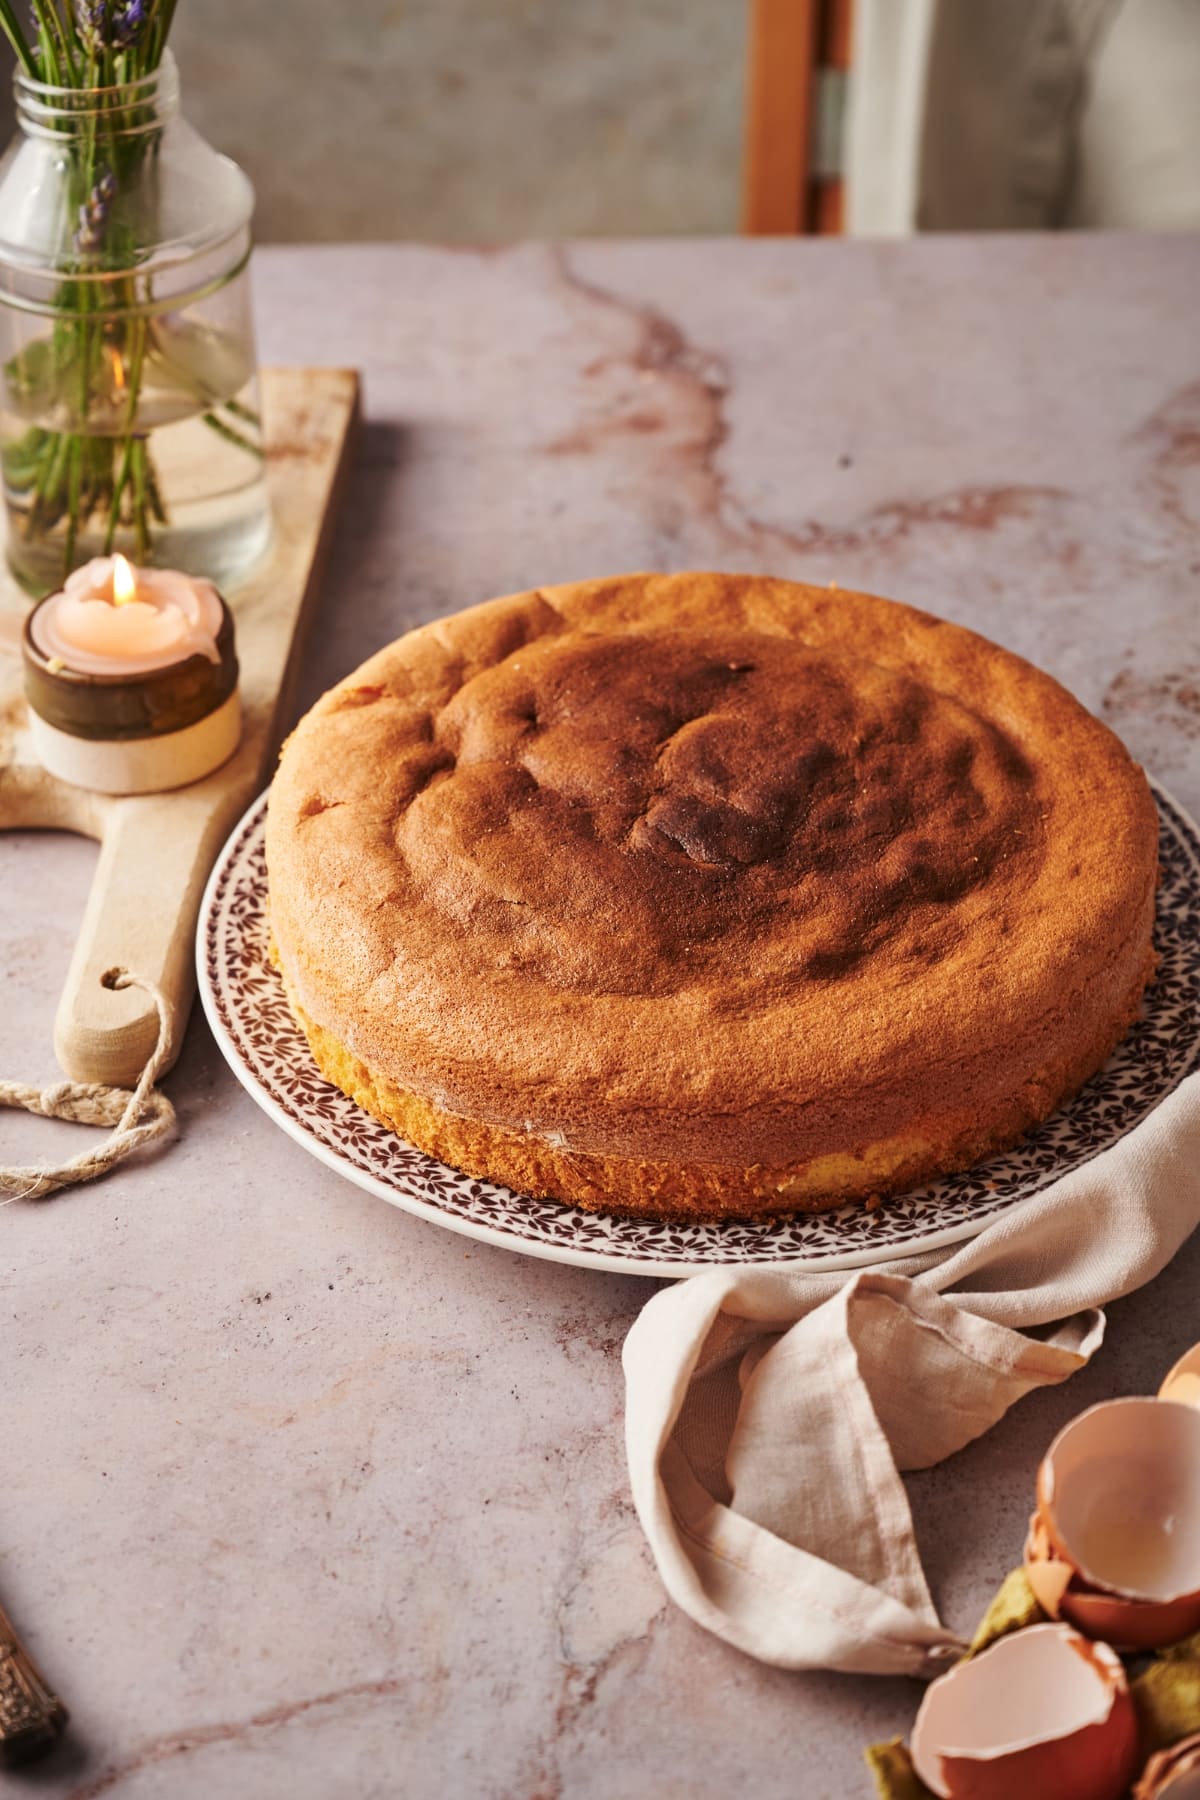 baked italian sponge cake on a floral plate on top of a marble counter top next to a wooden chopping board with a candle and vase of flowers.